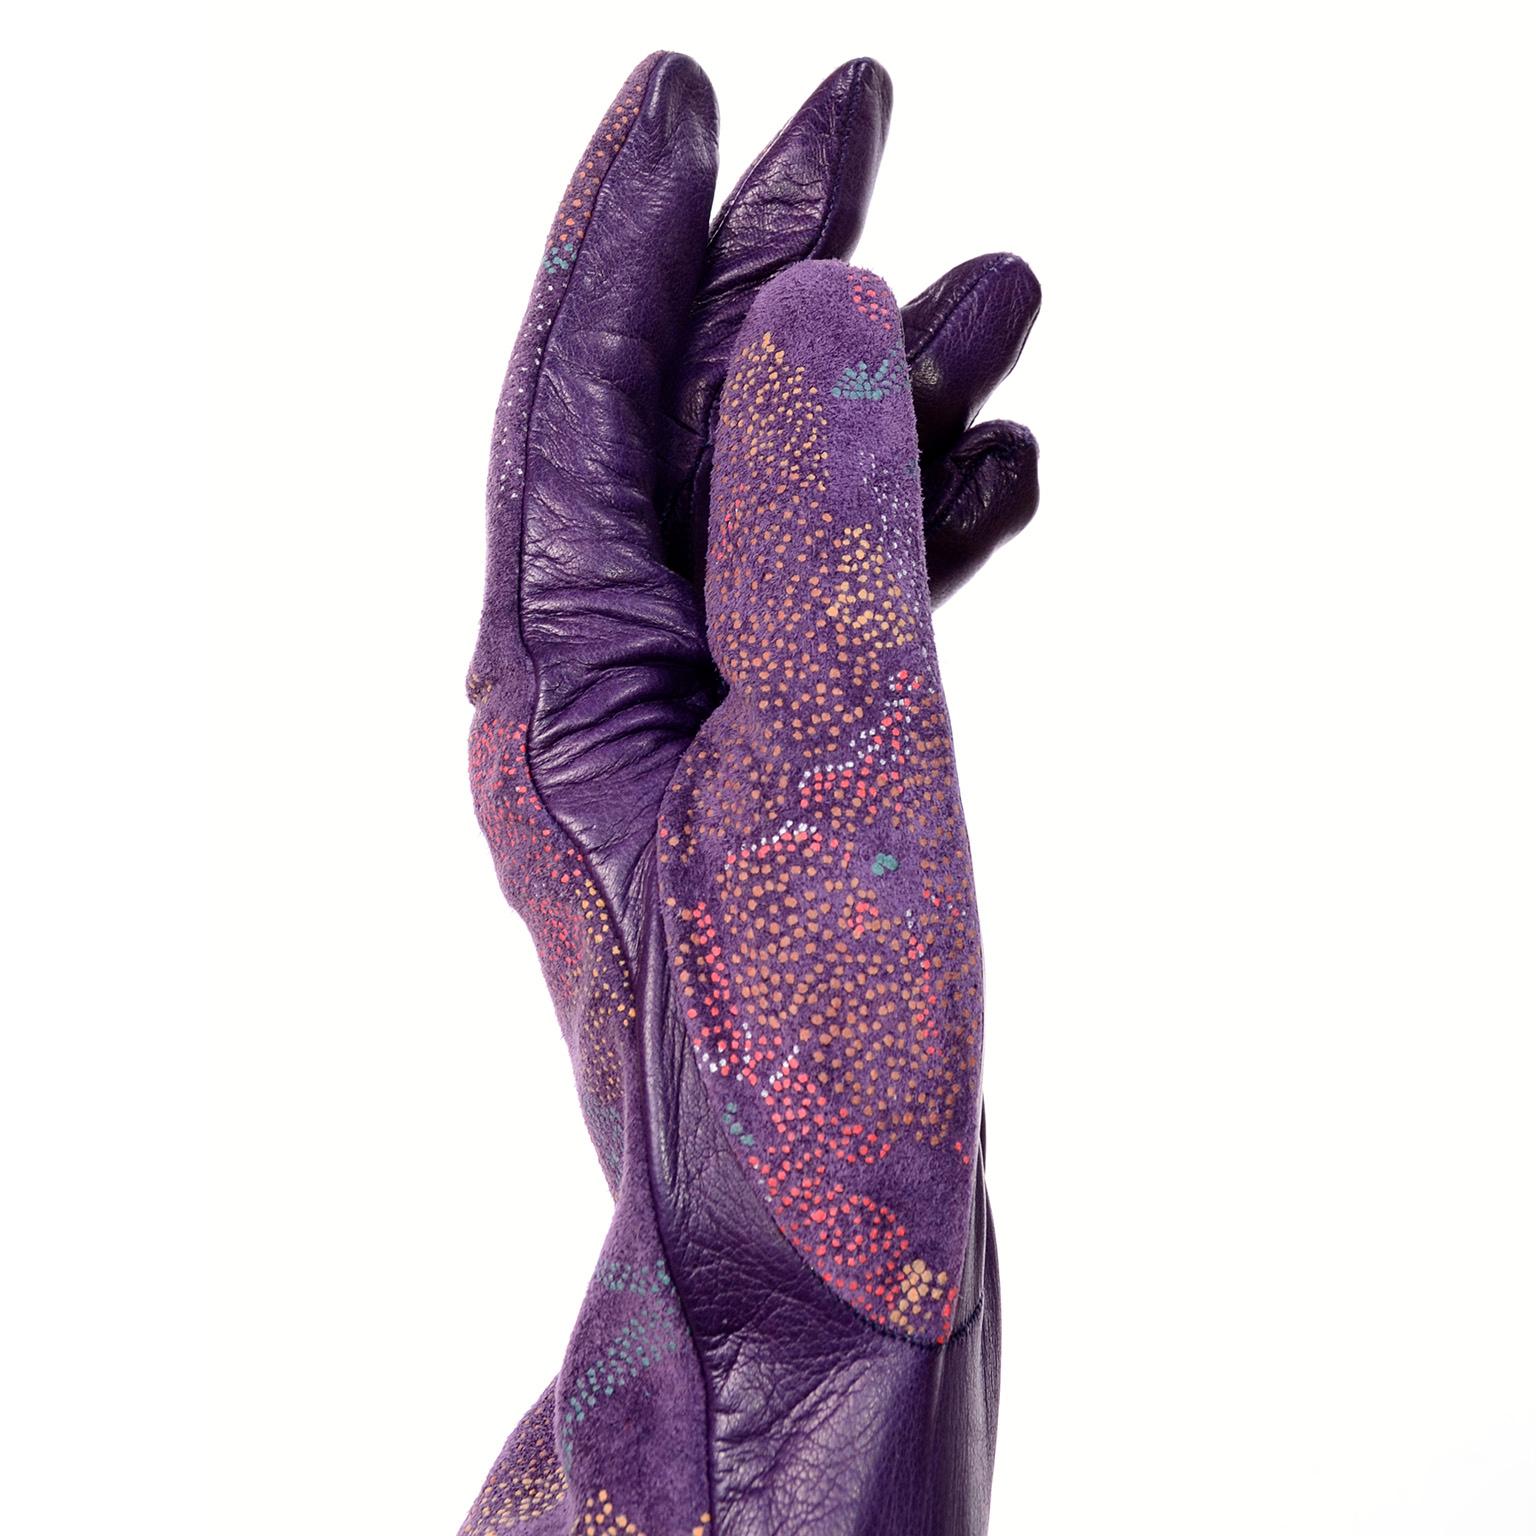 These stunning vintage leather gloves were designed by Carlos Falchi and were made in Italy. The gloves are purple leather with hand painted pointillism style flowers in purple, red, yellow, white and blue on the top side. Lined in silk, these